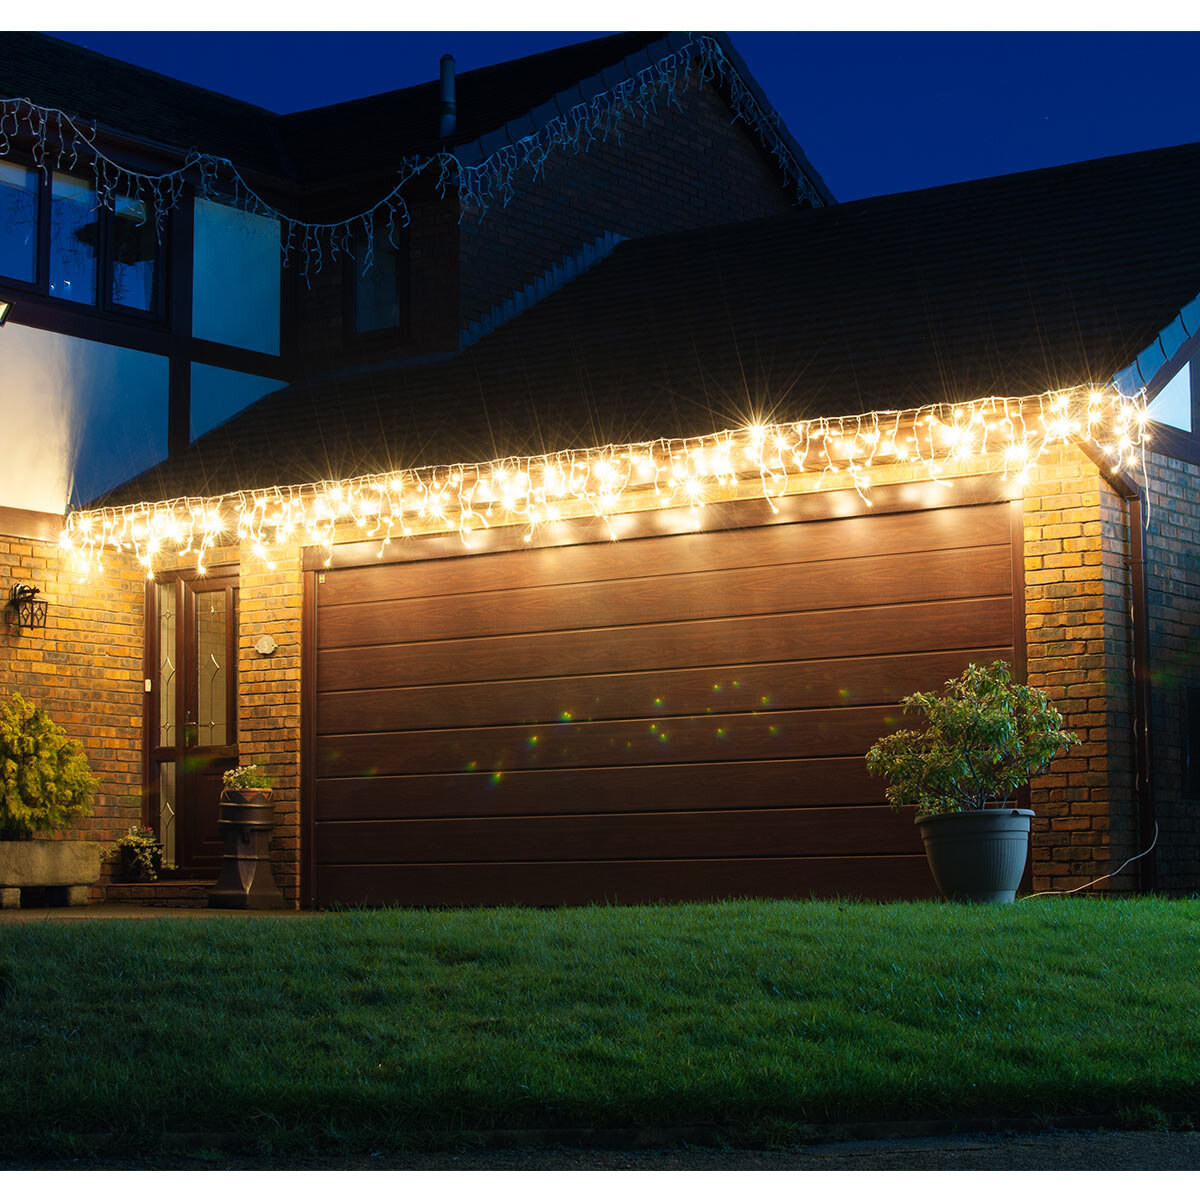 Buy Warm White 4m 150 Bulbs LED Lights Overview3 Image at Costco.co.uk